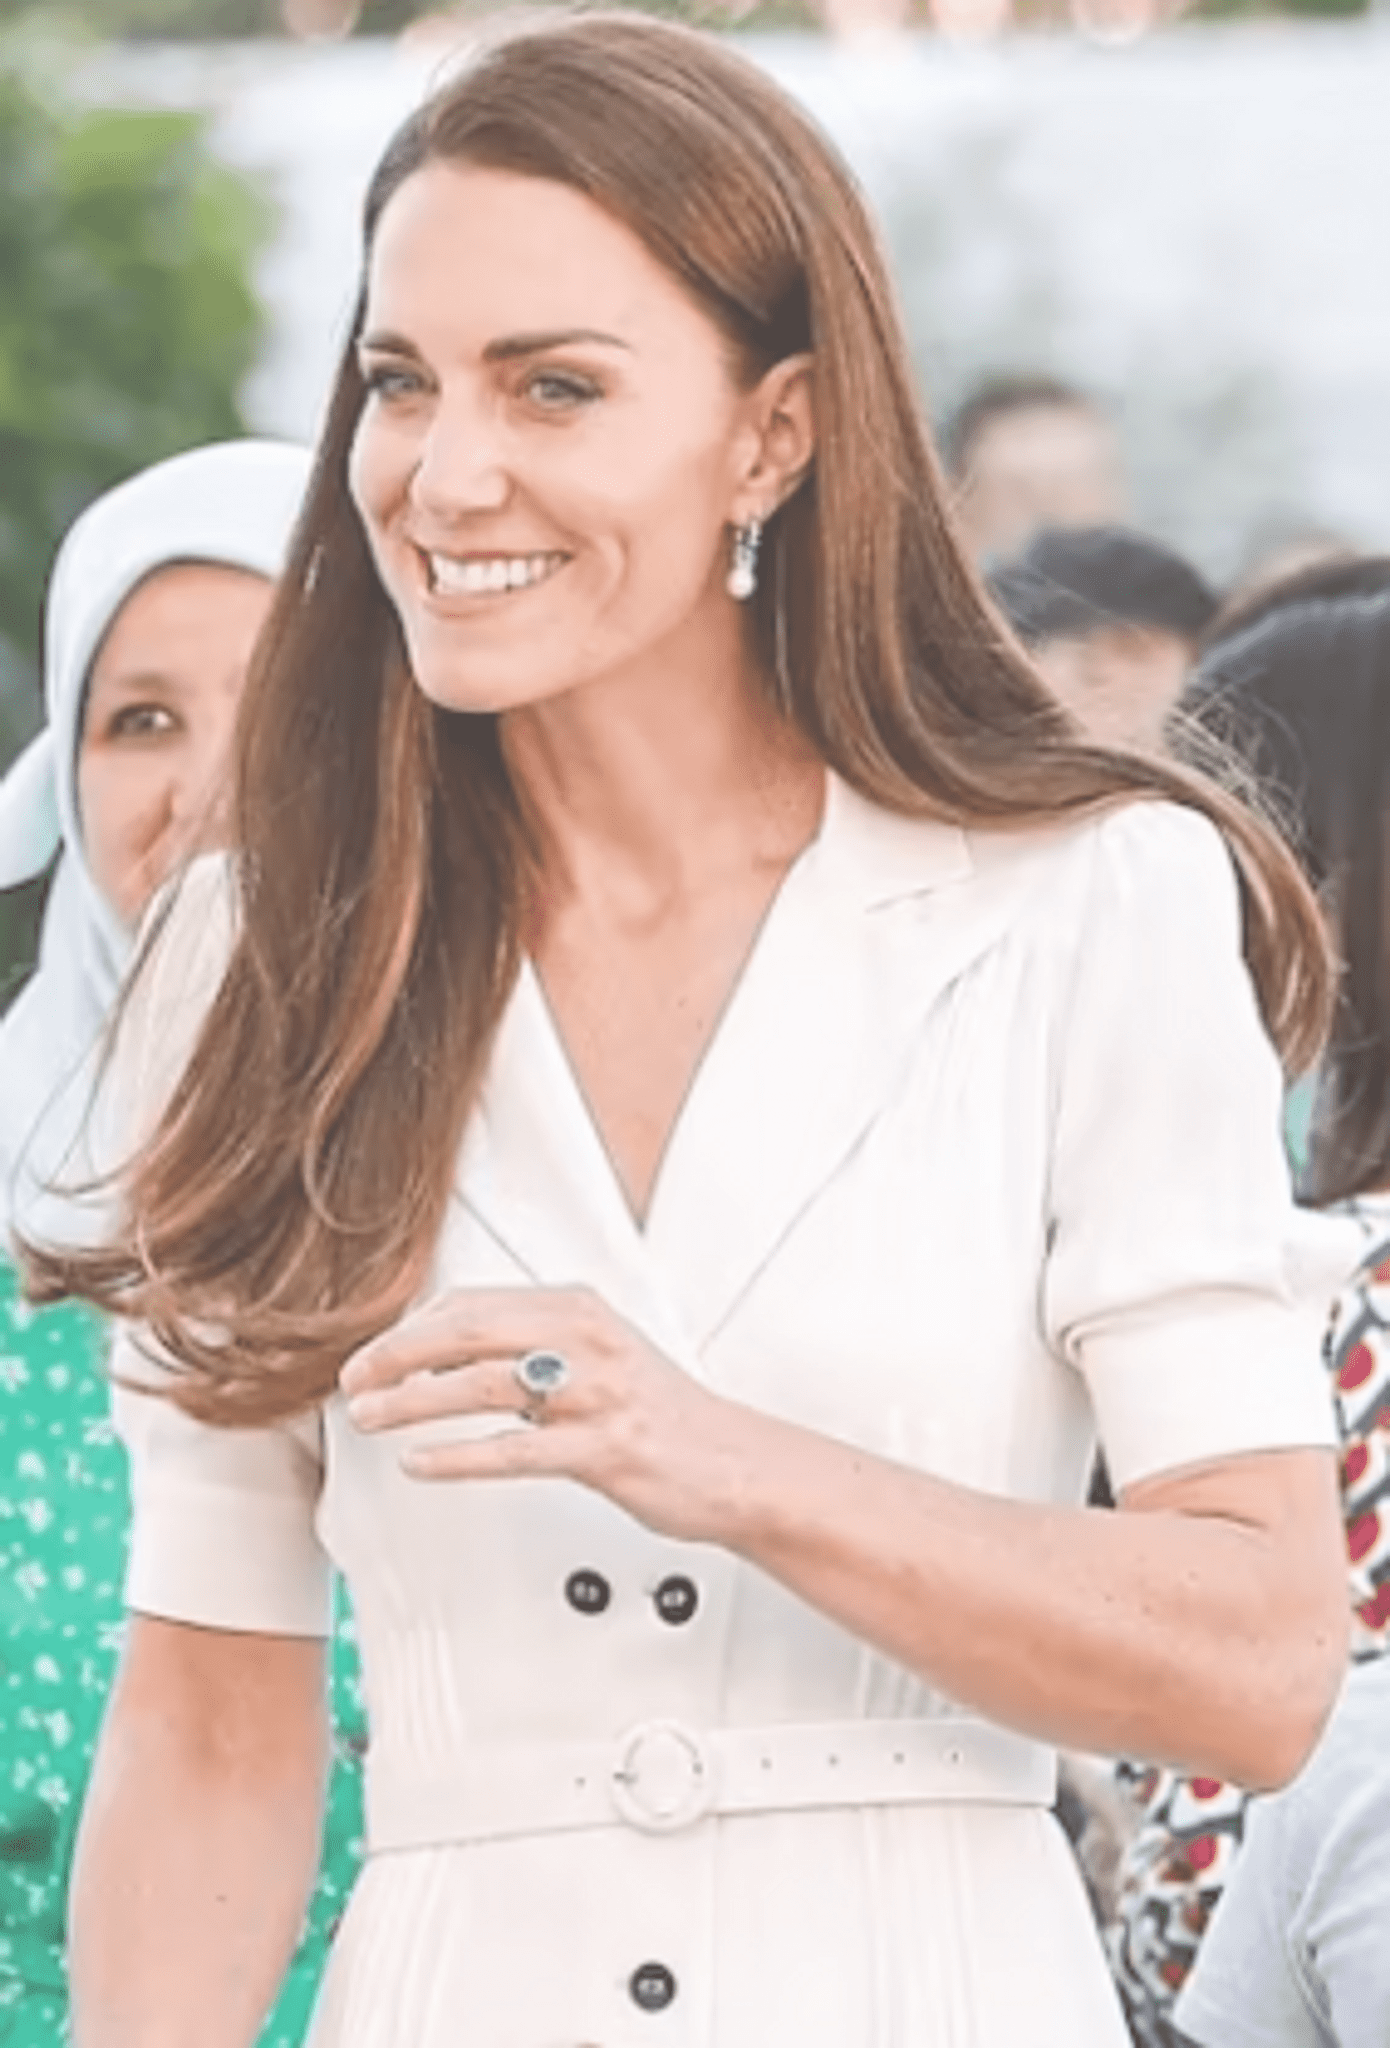 ”look-at-kate-middleton-in-a-white-dress-perfect-for-summer-outings”